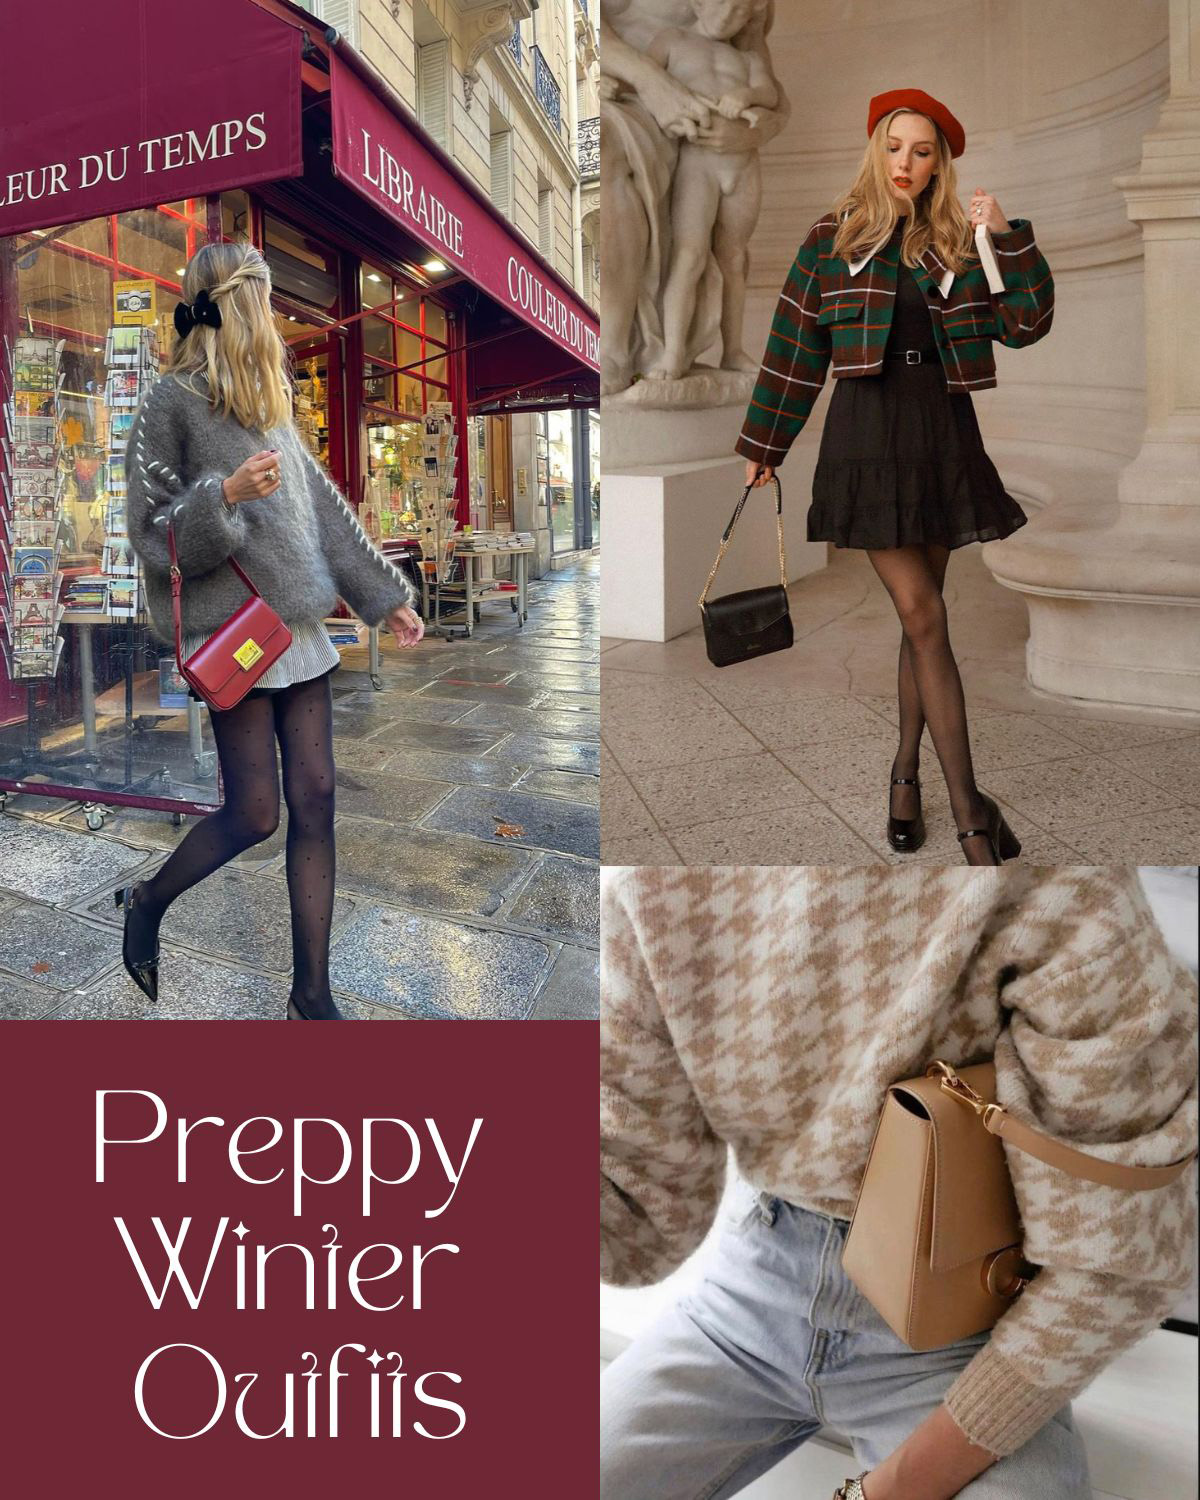 Preppy girls in winter outfits